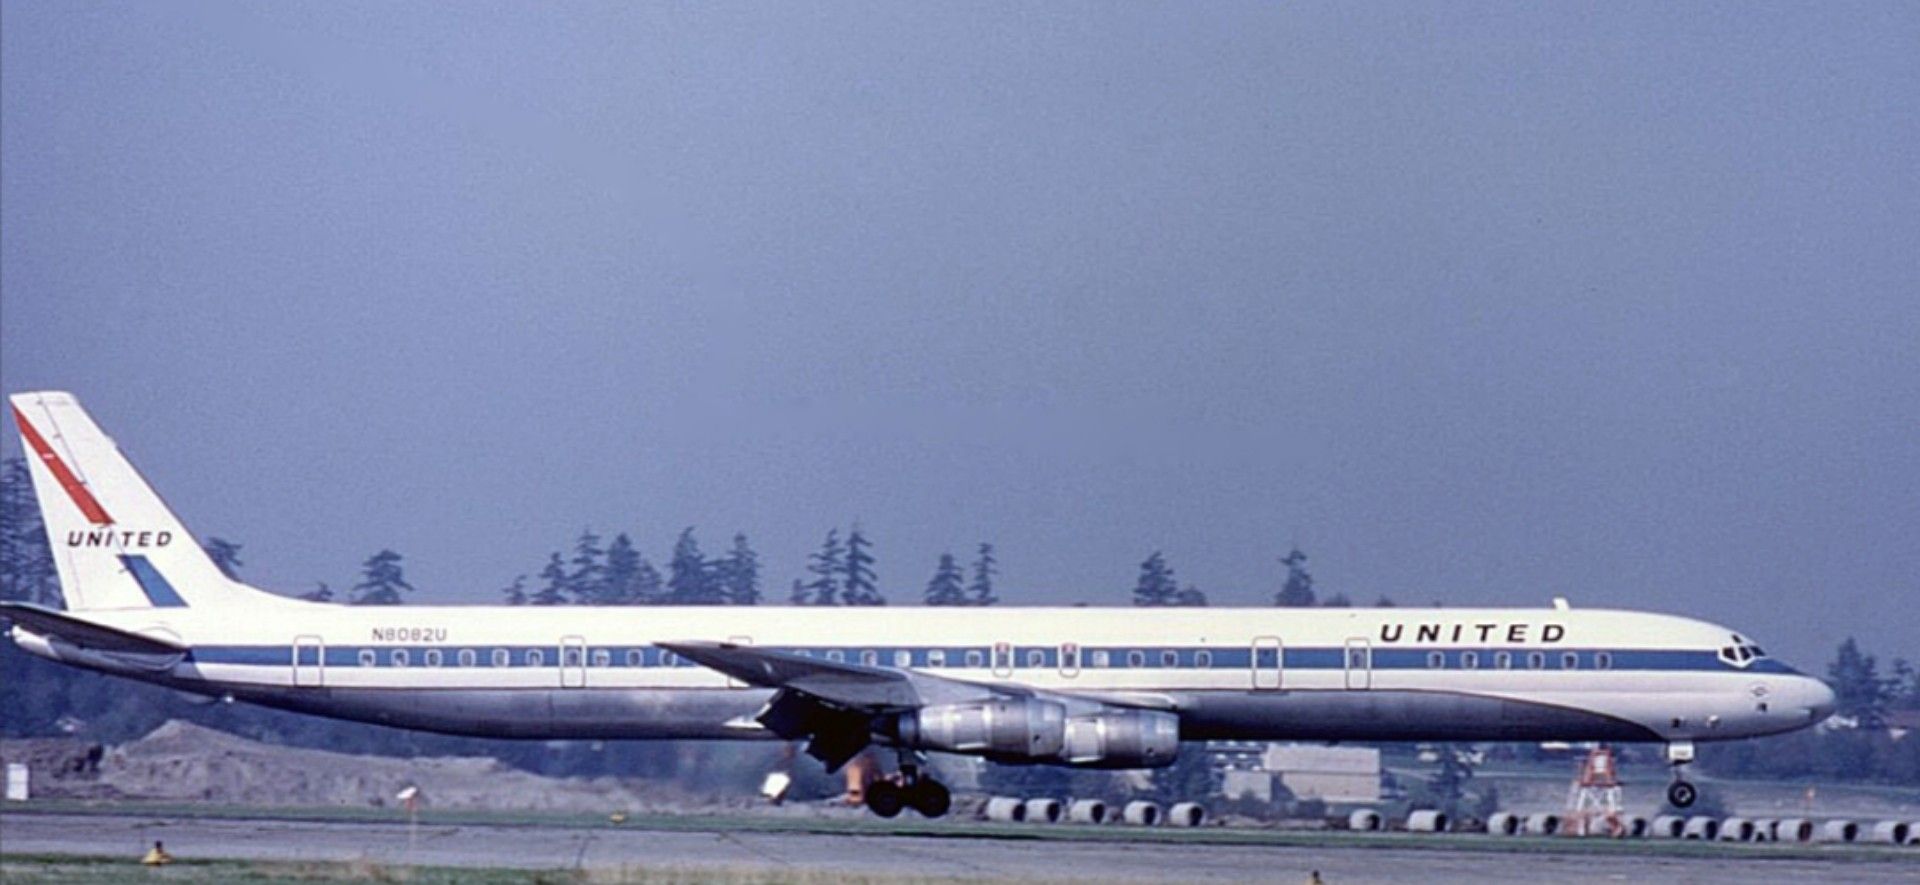 White passenger jetliner with navy blue stripe down the side and United branding near the nose and on the tail